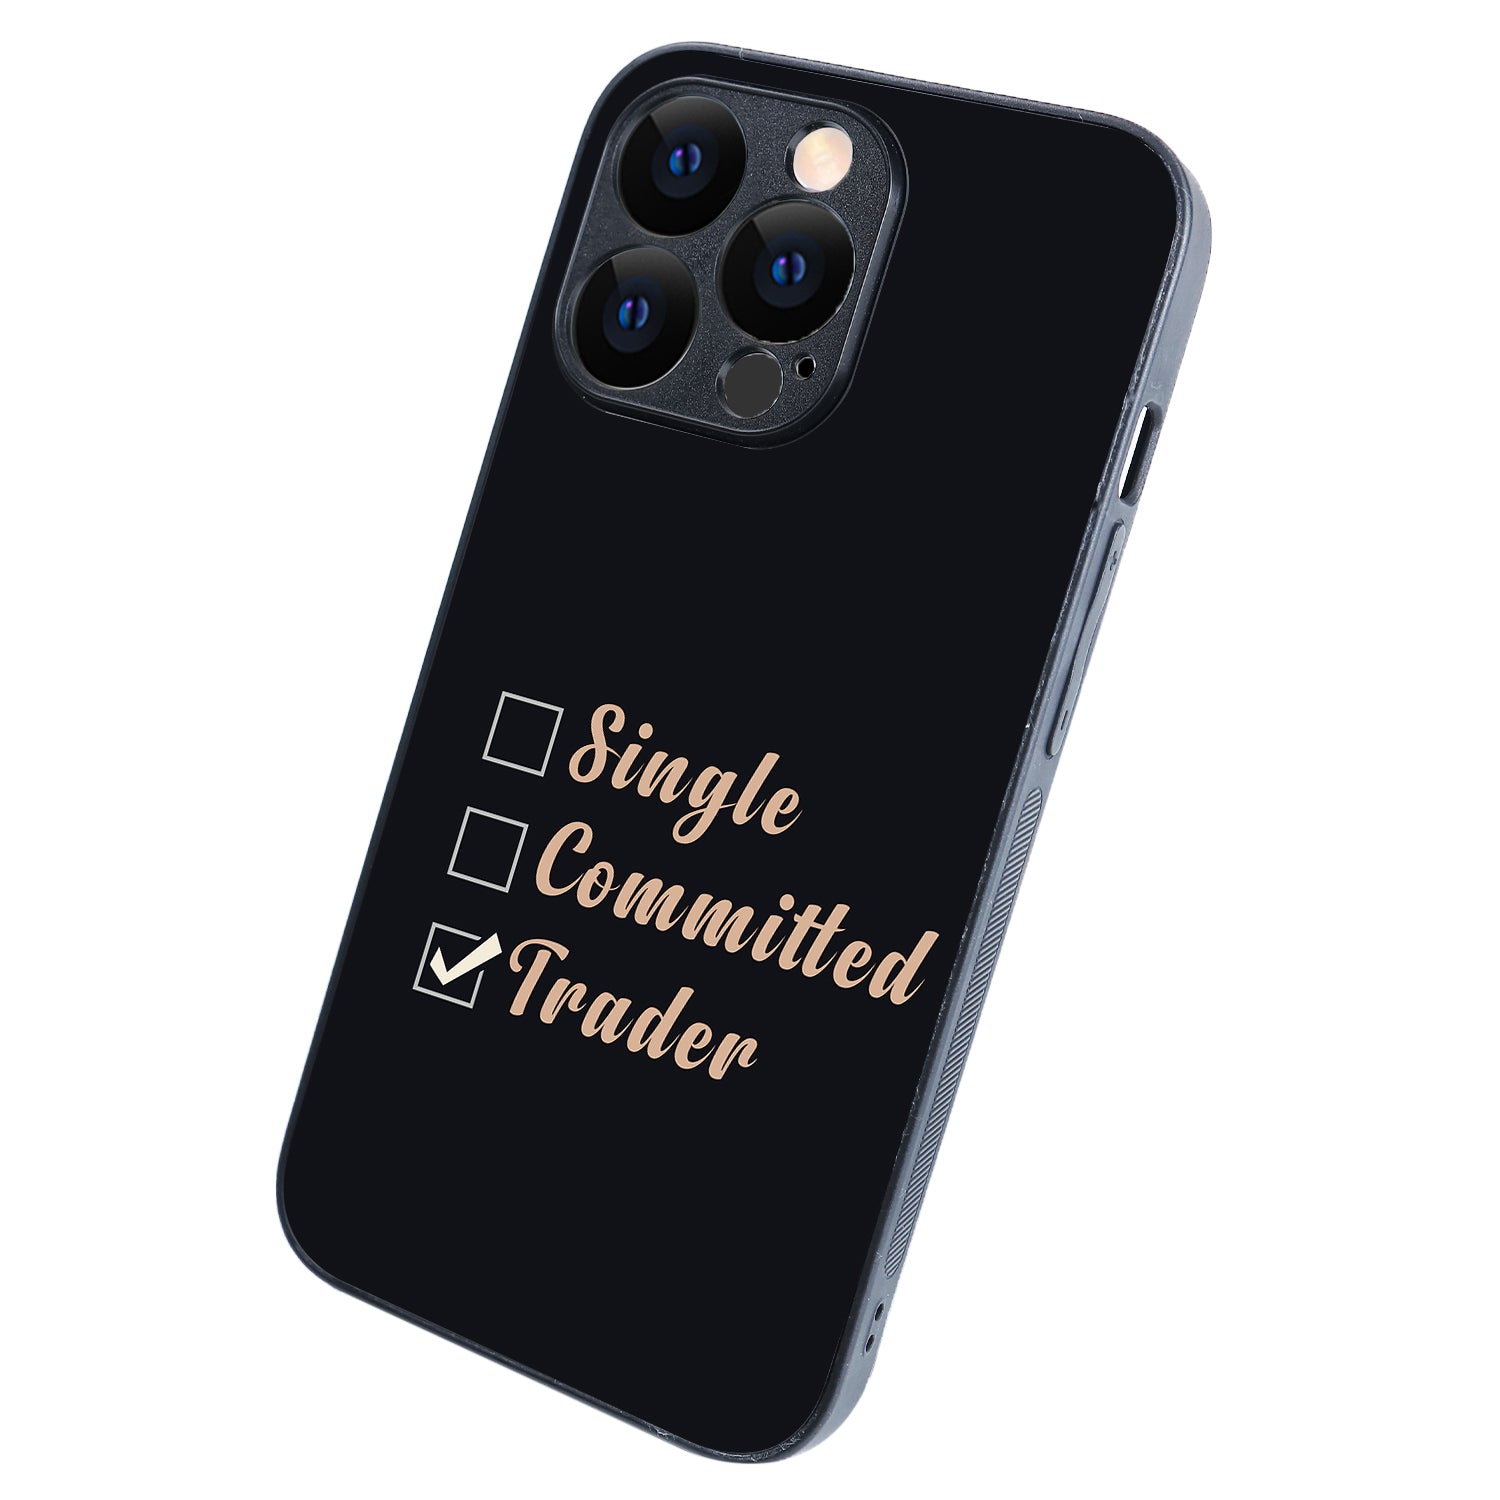 Single, Commited, Trader Trading iPhone 13 Pro Case